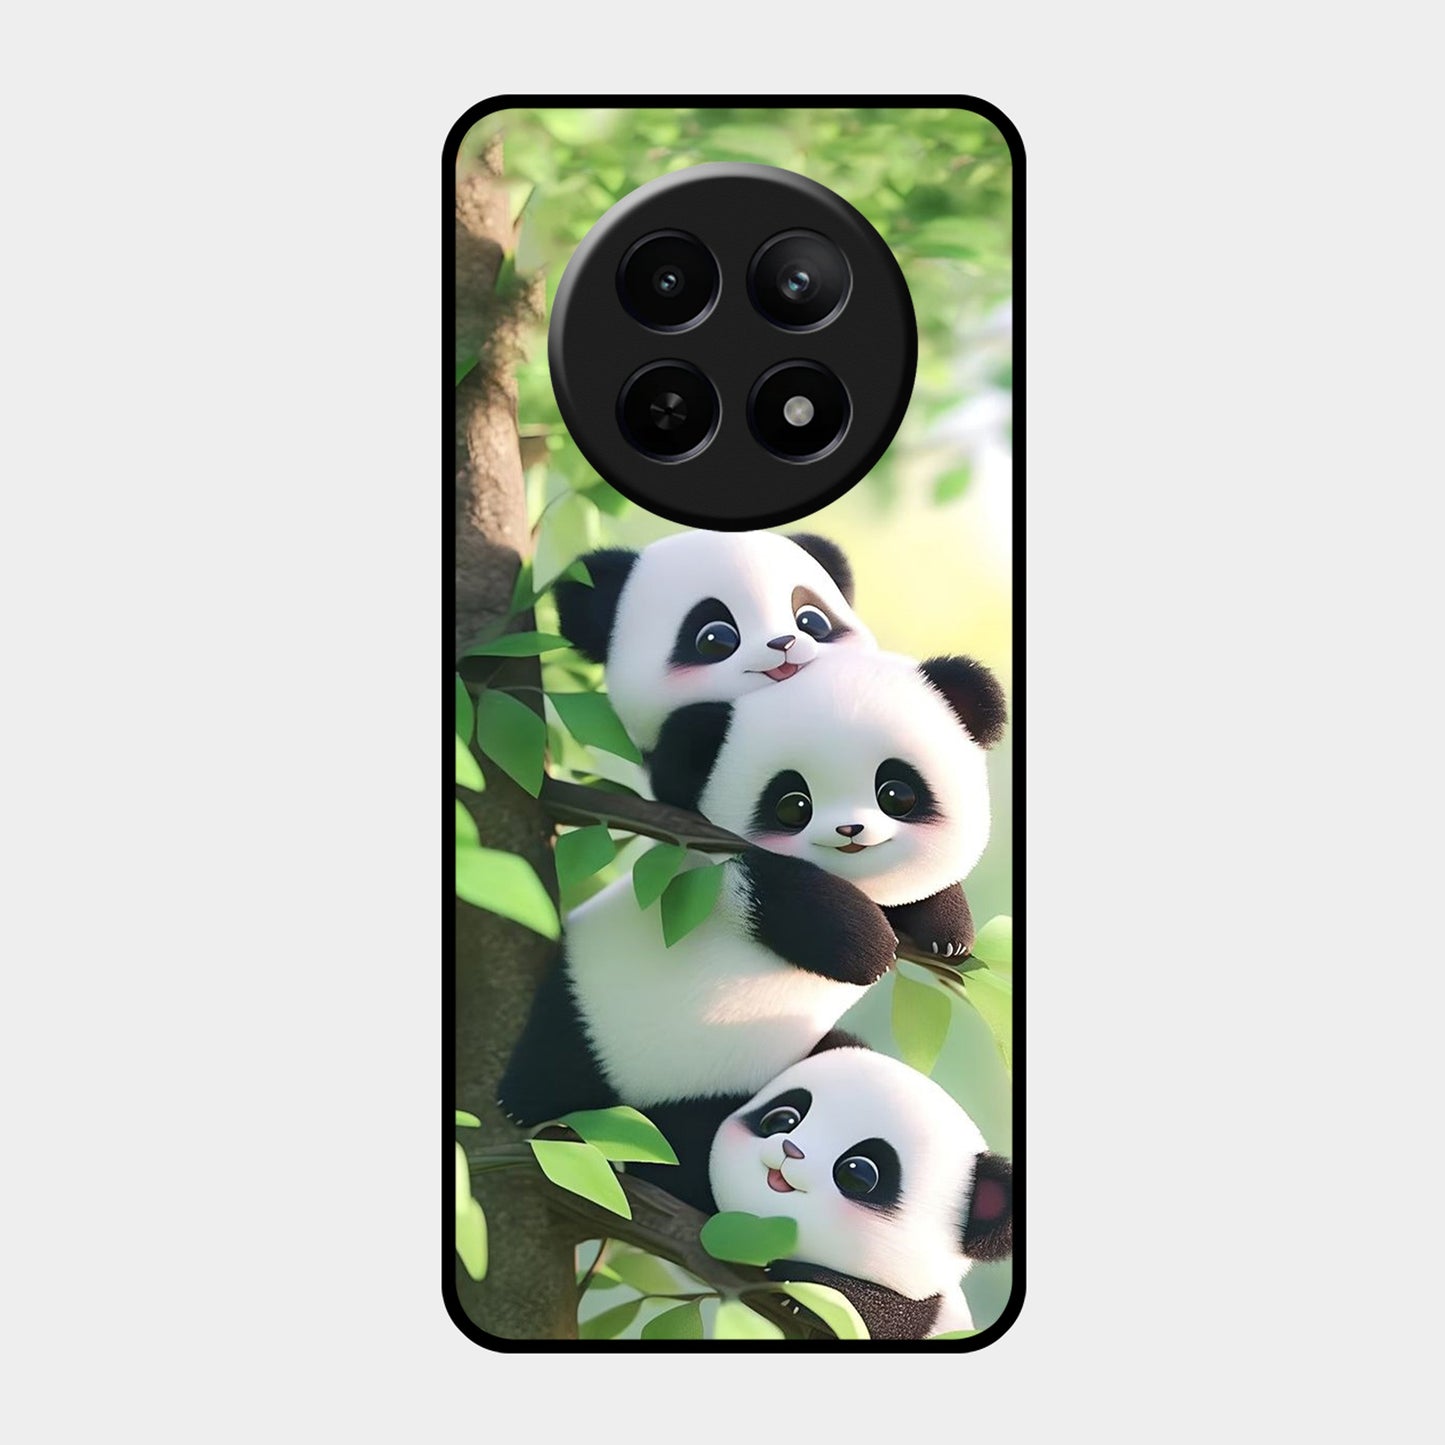 Panda Glossy Metal Case Cover For Realme